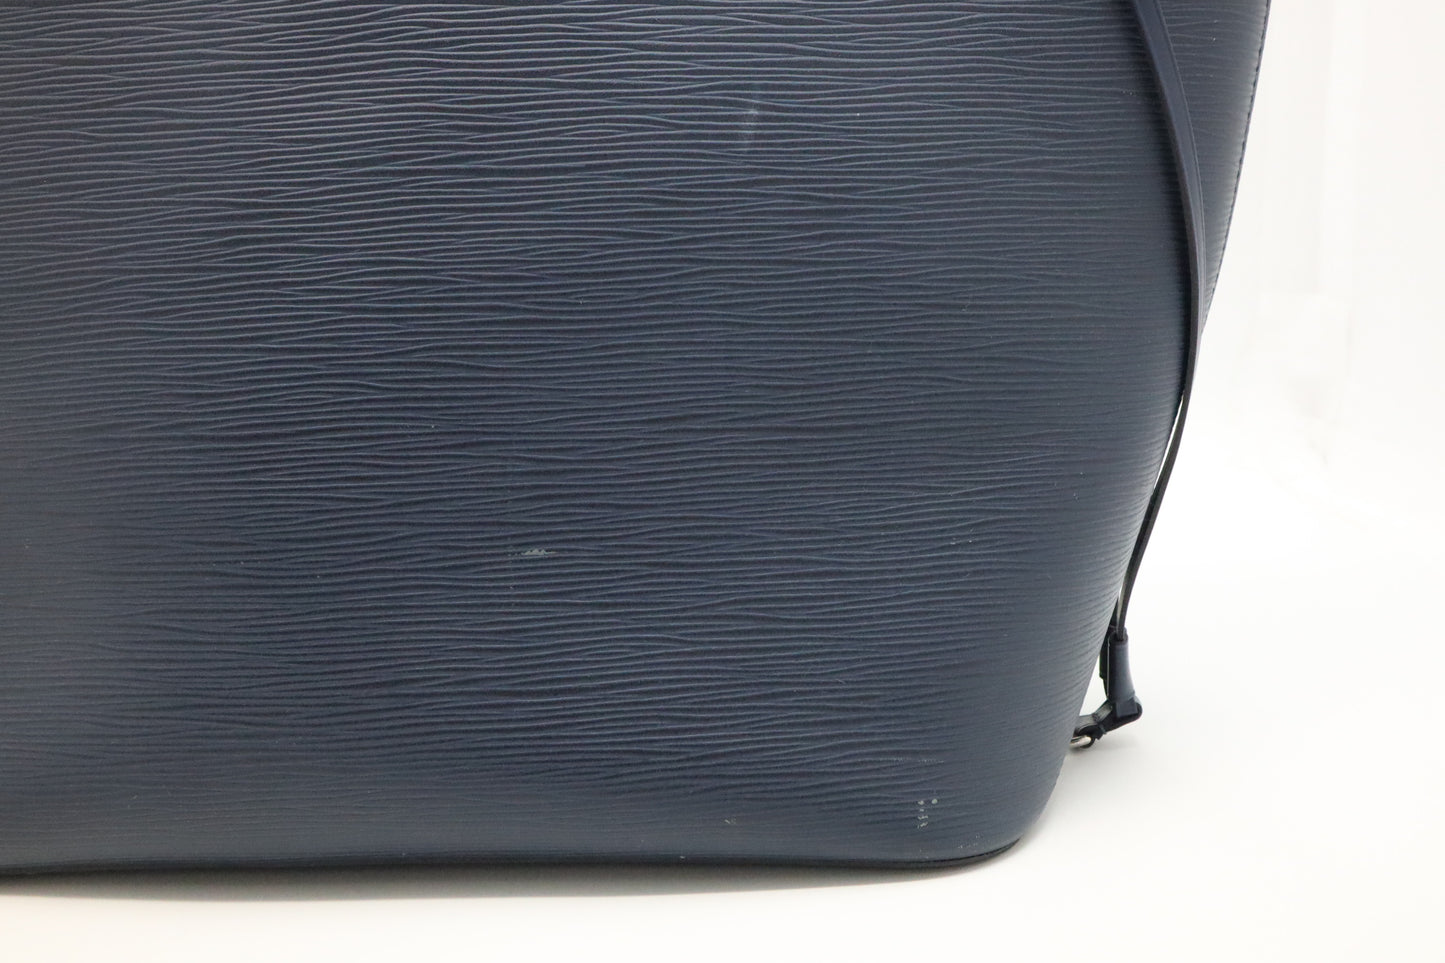 Louis Vuitton Neverfull MM in Navy Blue Epi Leather